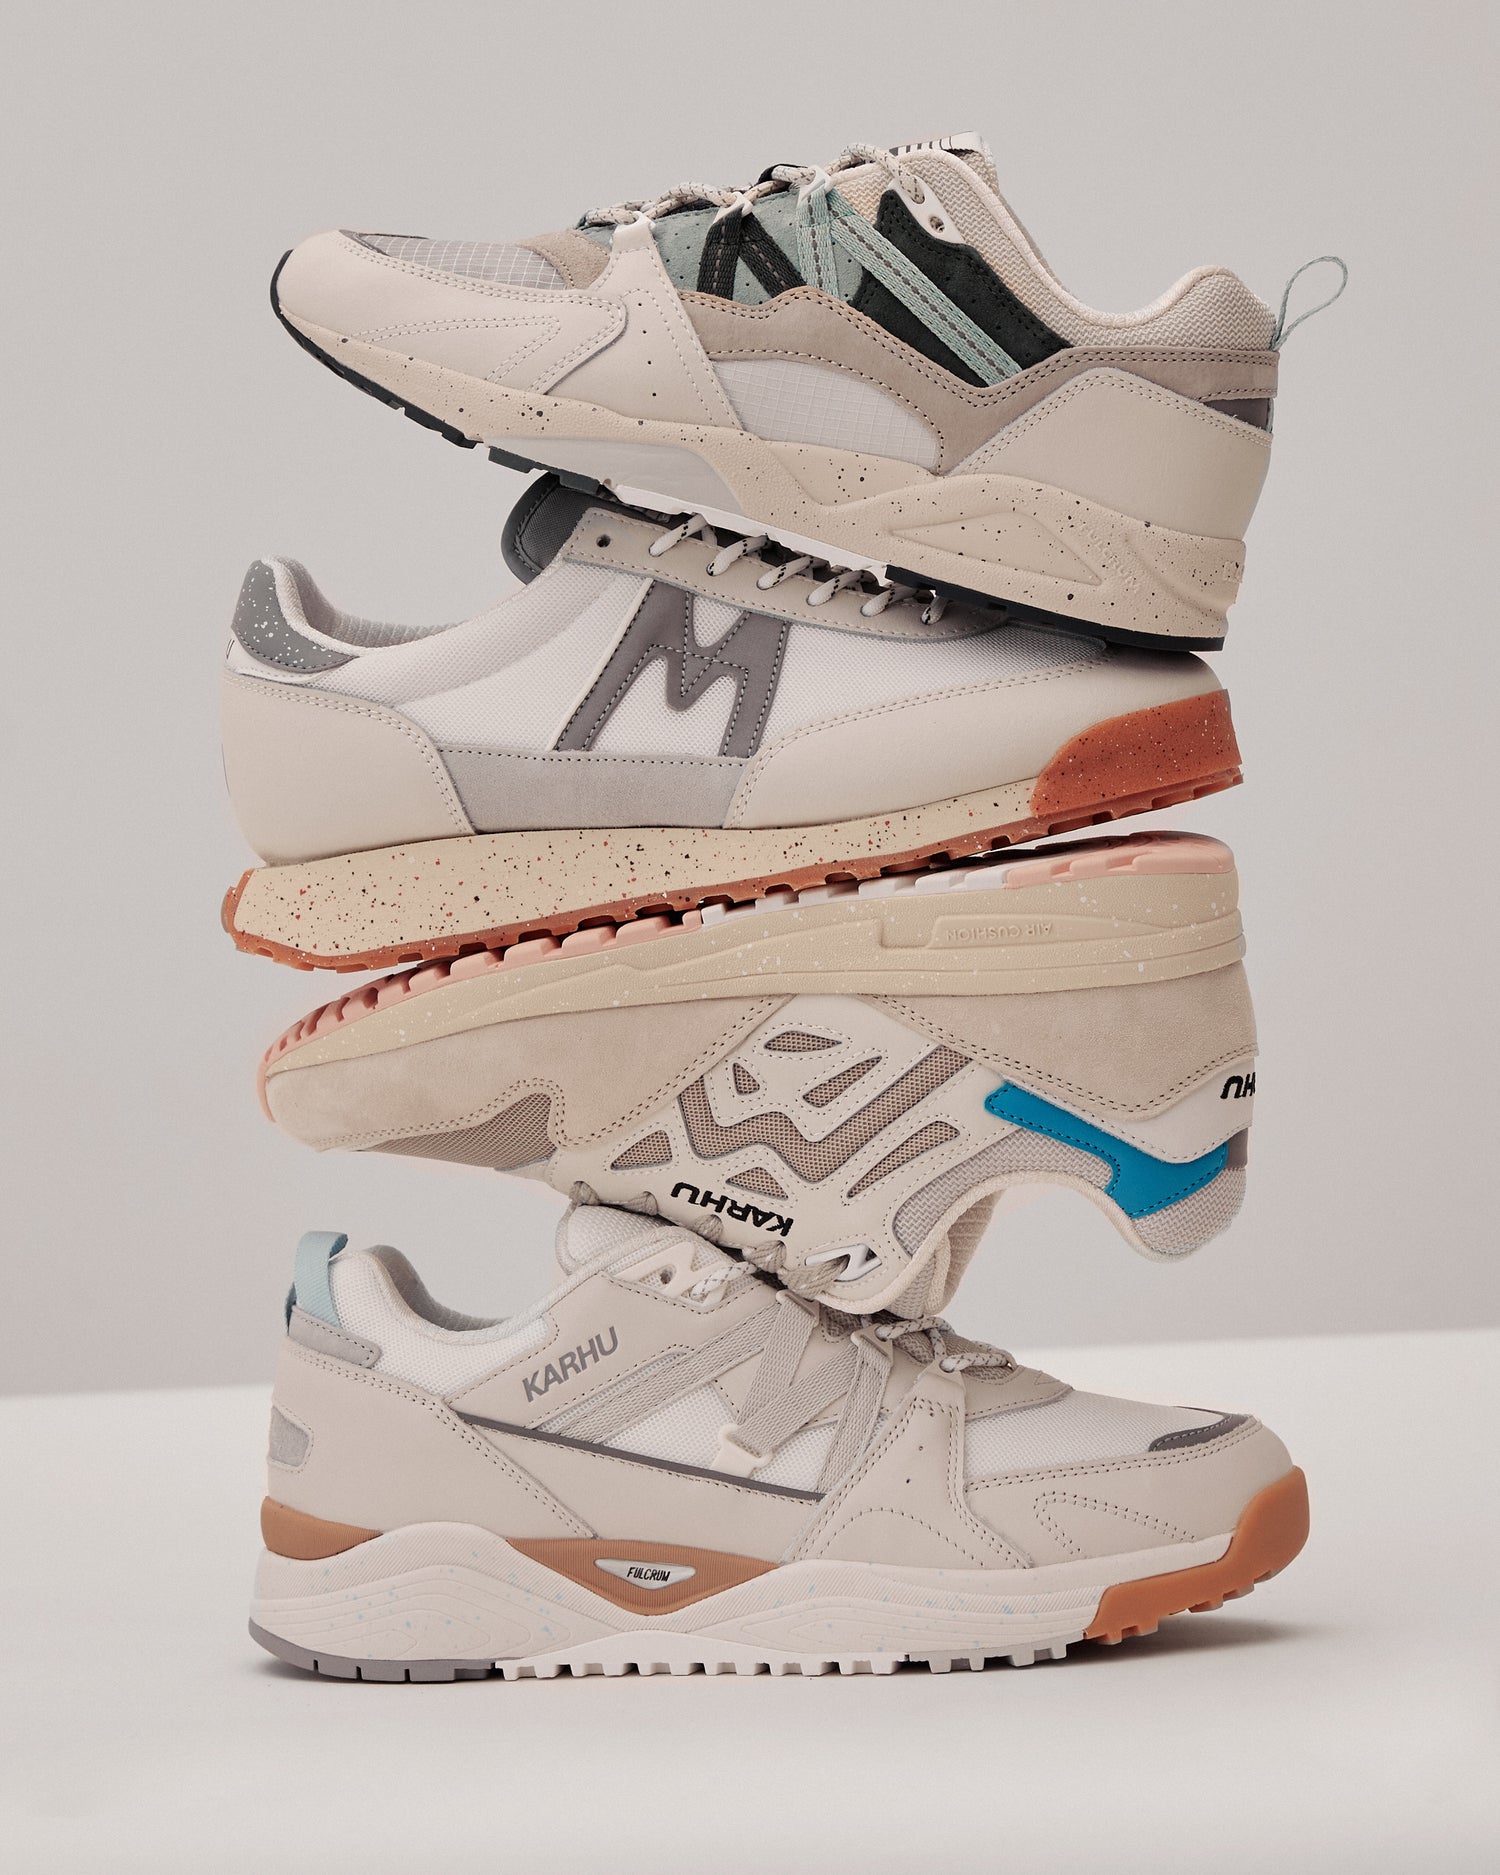 GET IN THE ZONE WITH KARHU’S NEW ''FLOW STATE'' PACK